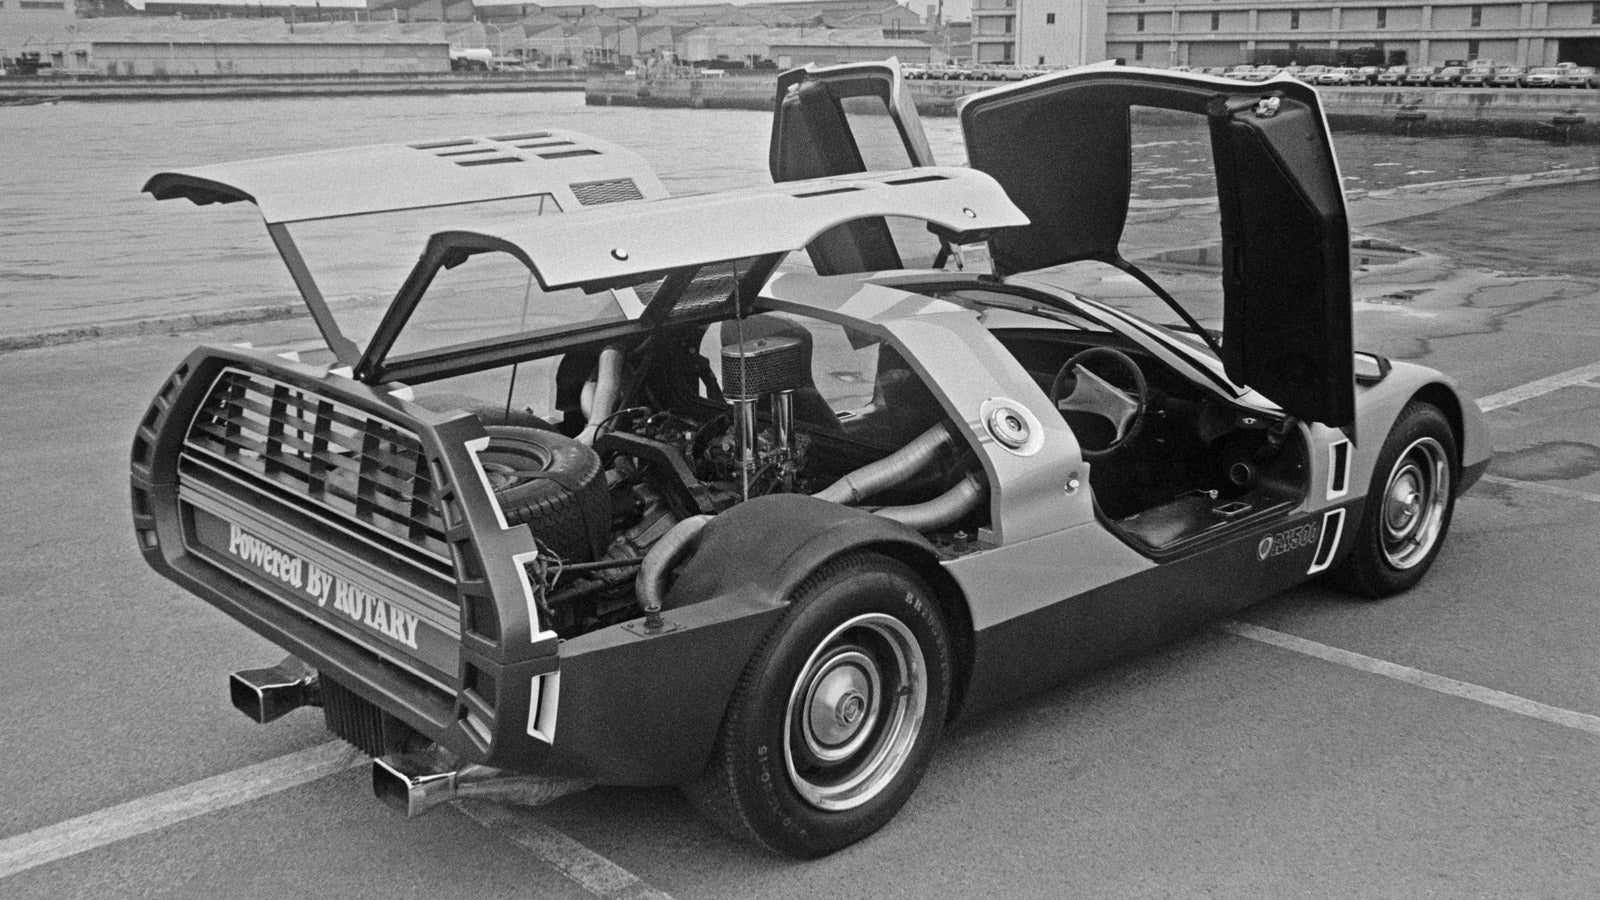 The Mazda RX500 Was A Pinball Machine On Wheels That Made Road Safety Fun